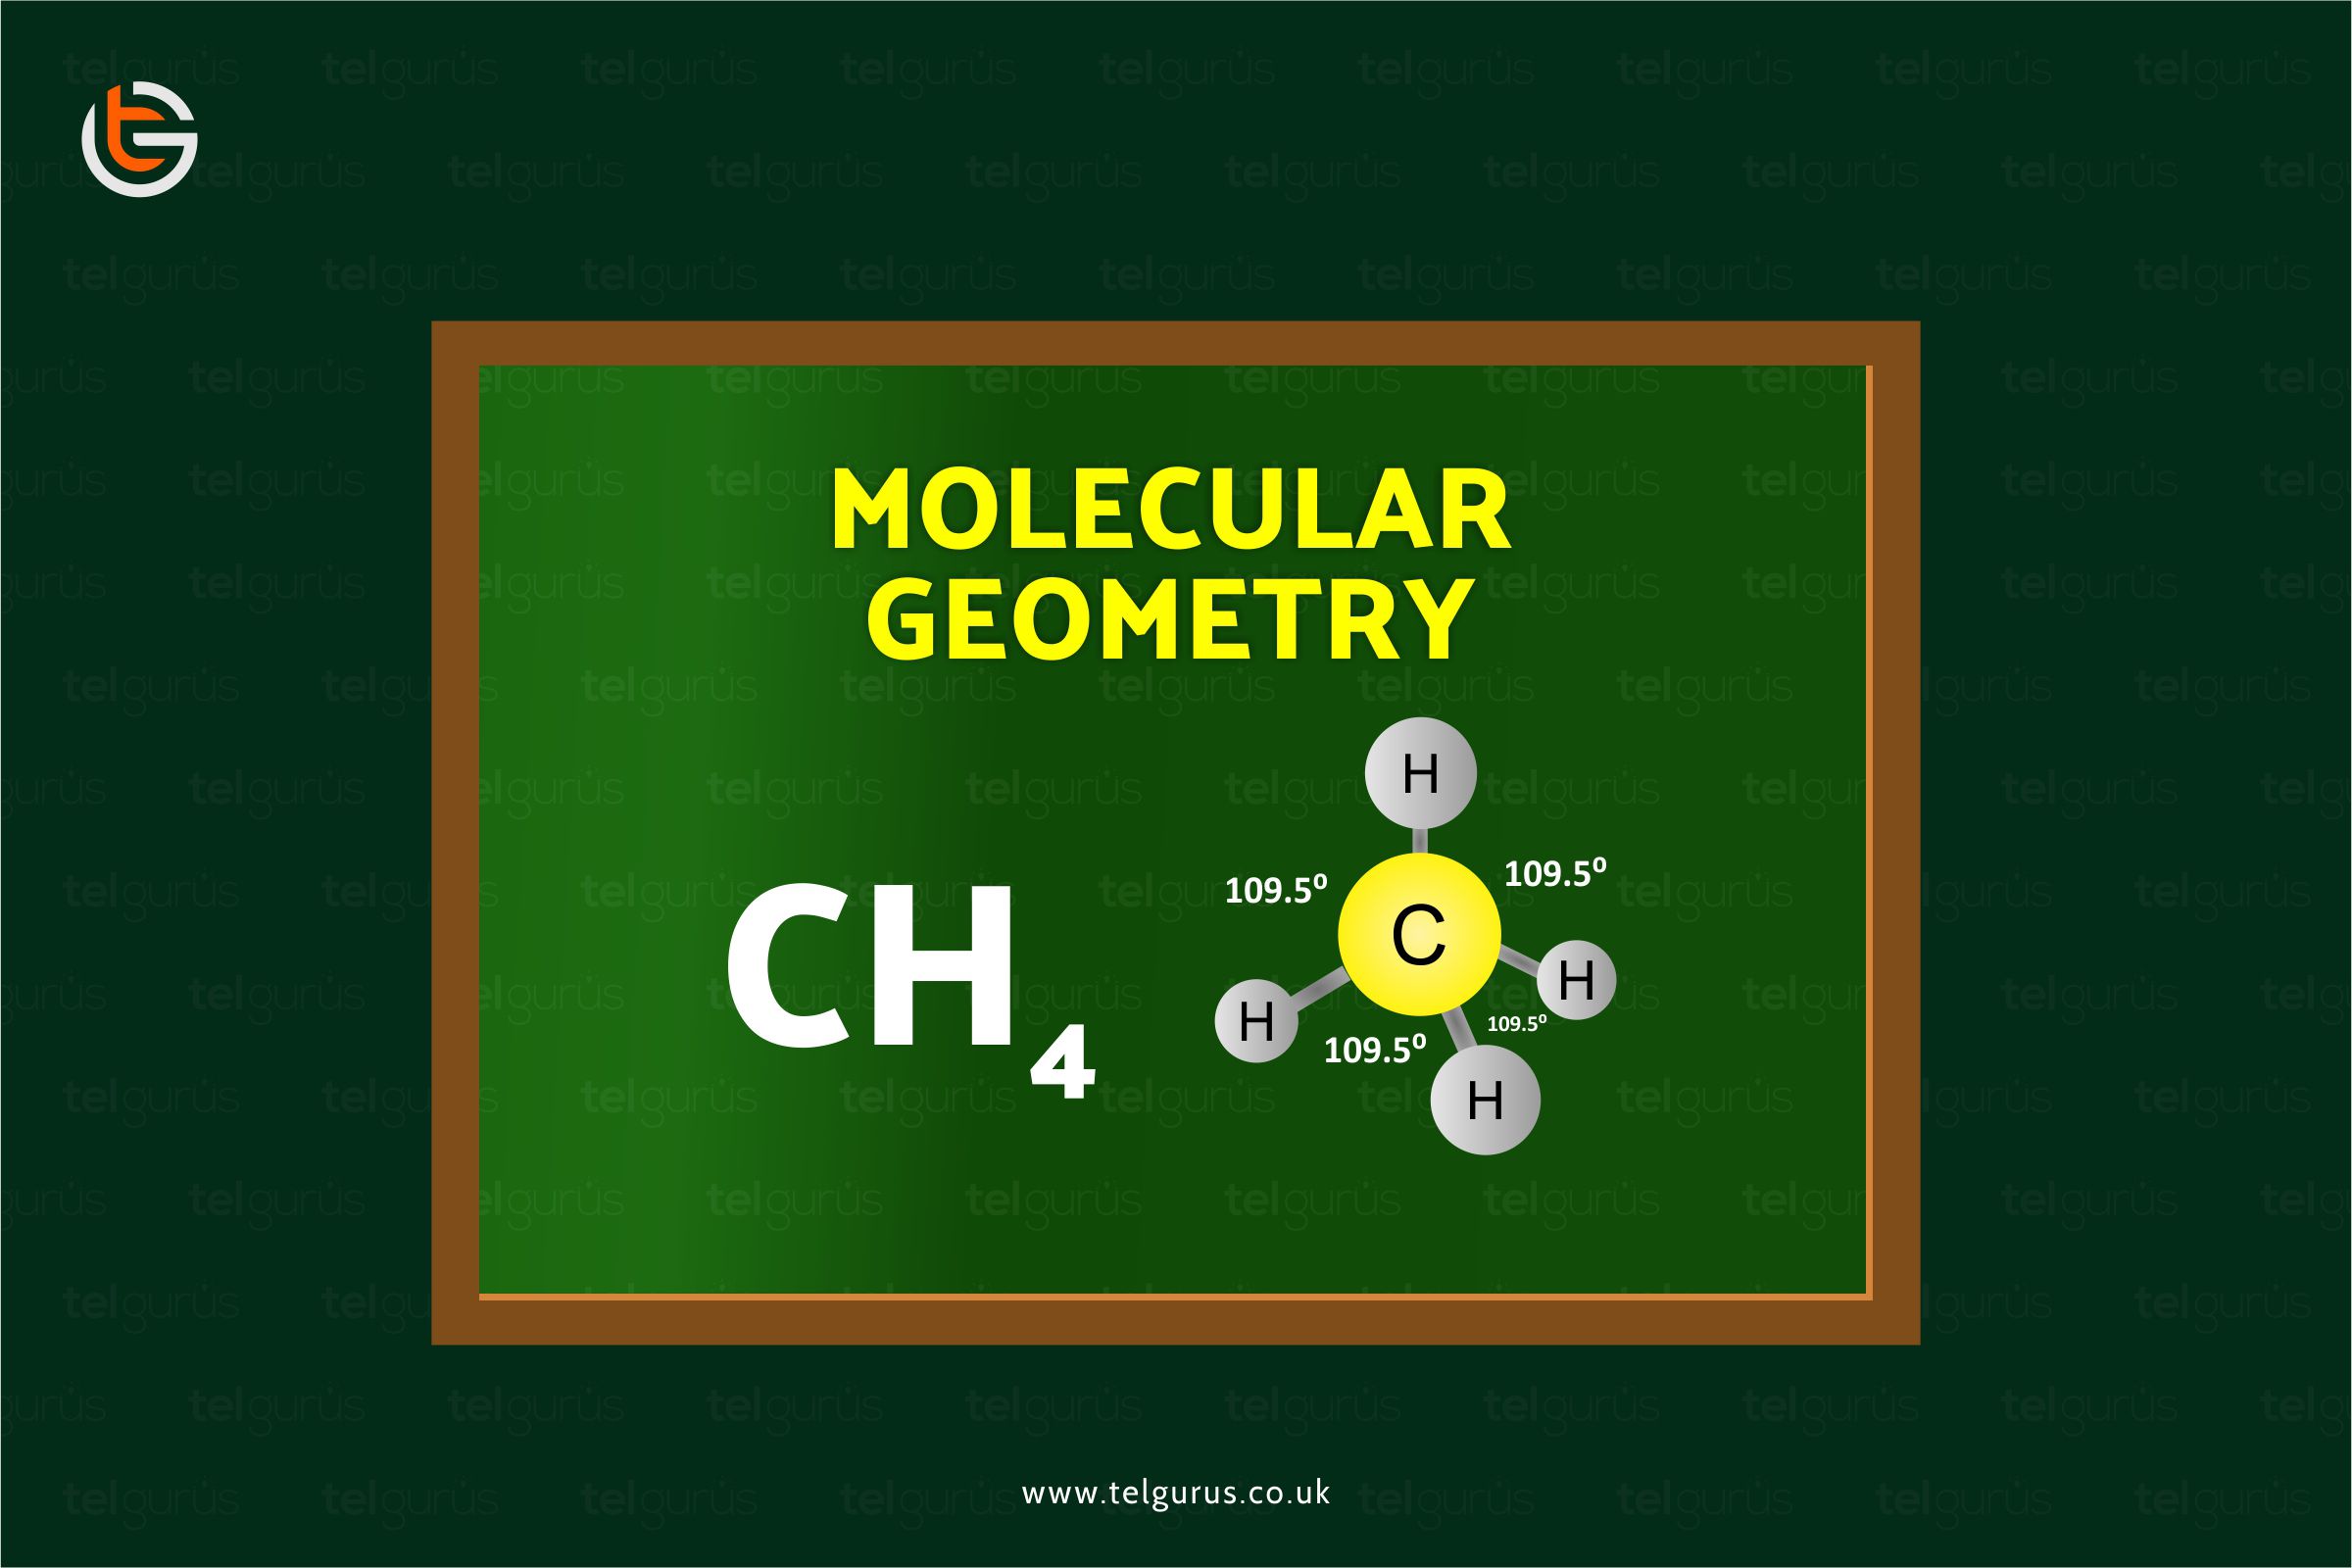 Explain the molecular structure of CH4